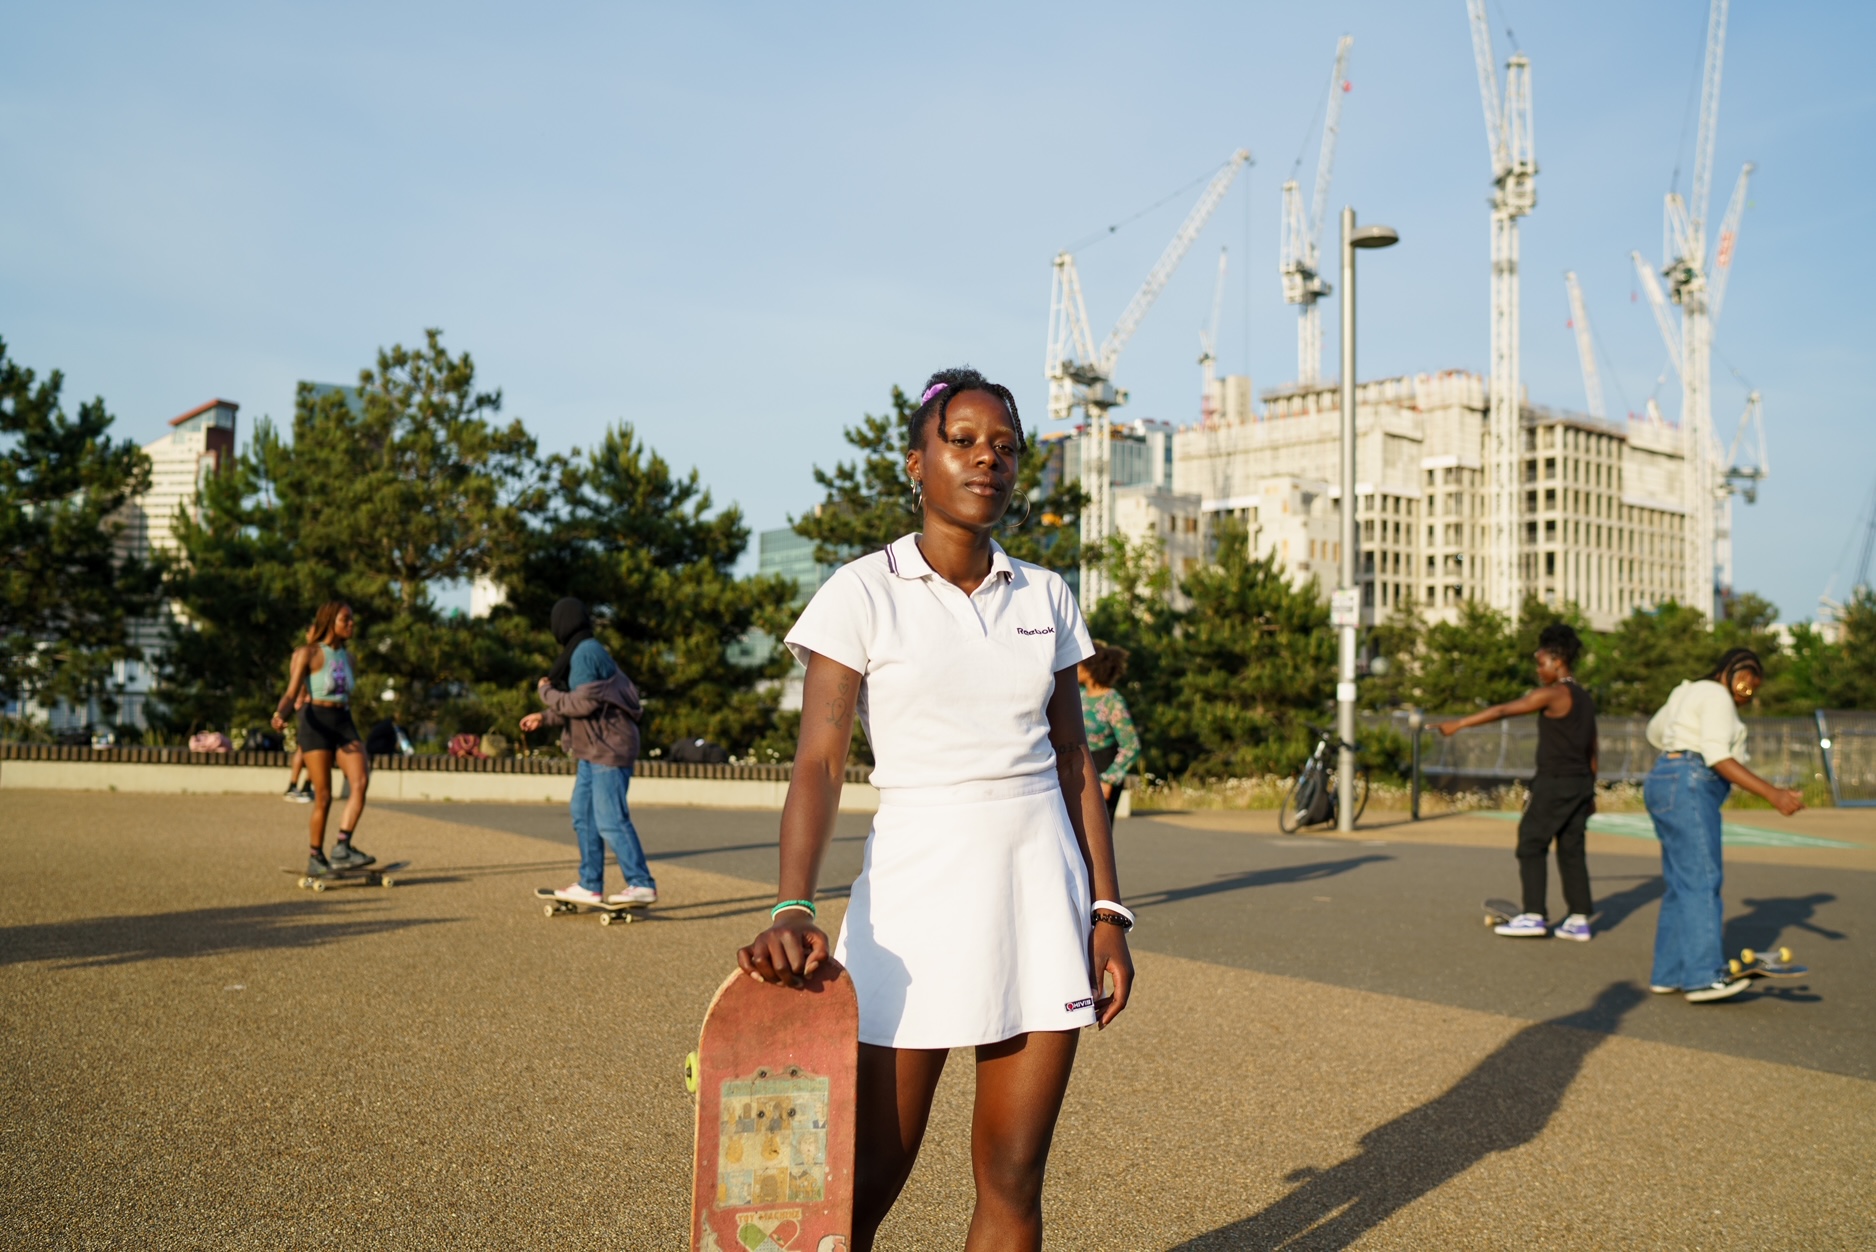 We Chat With Melanin Skate Gals & Pals About Fair Representation of BIPOC Folks in Skateboarding